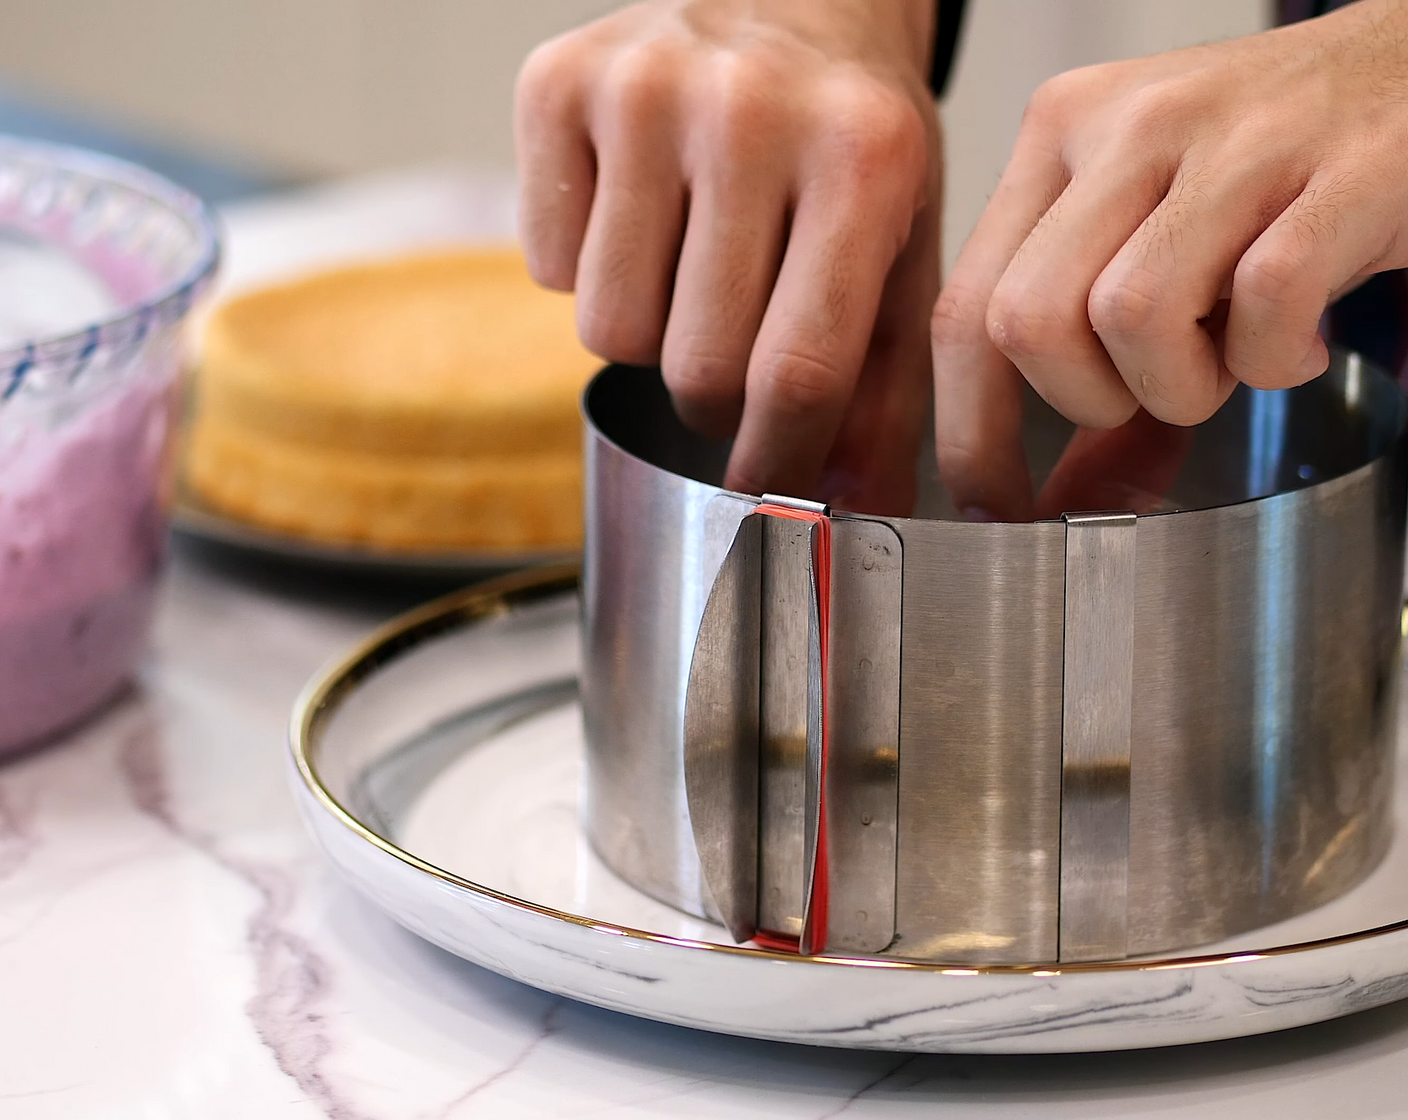 step 13 Prepare a 16-centimeter round cake ring along with a 6-centimeter transparent plastic cake wrapper to layer the cake.